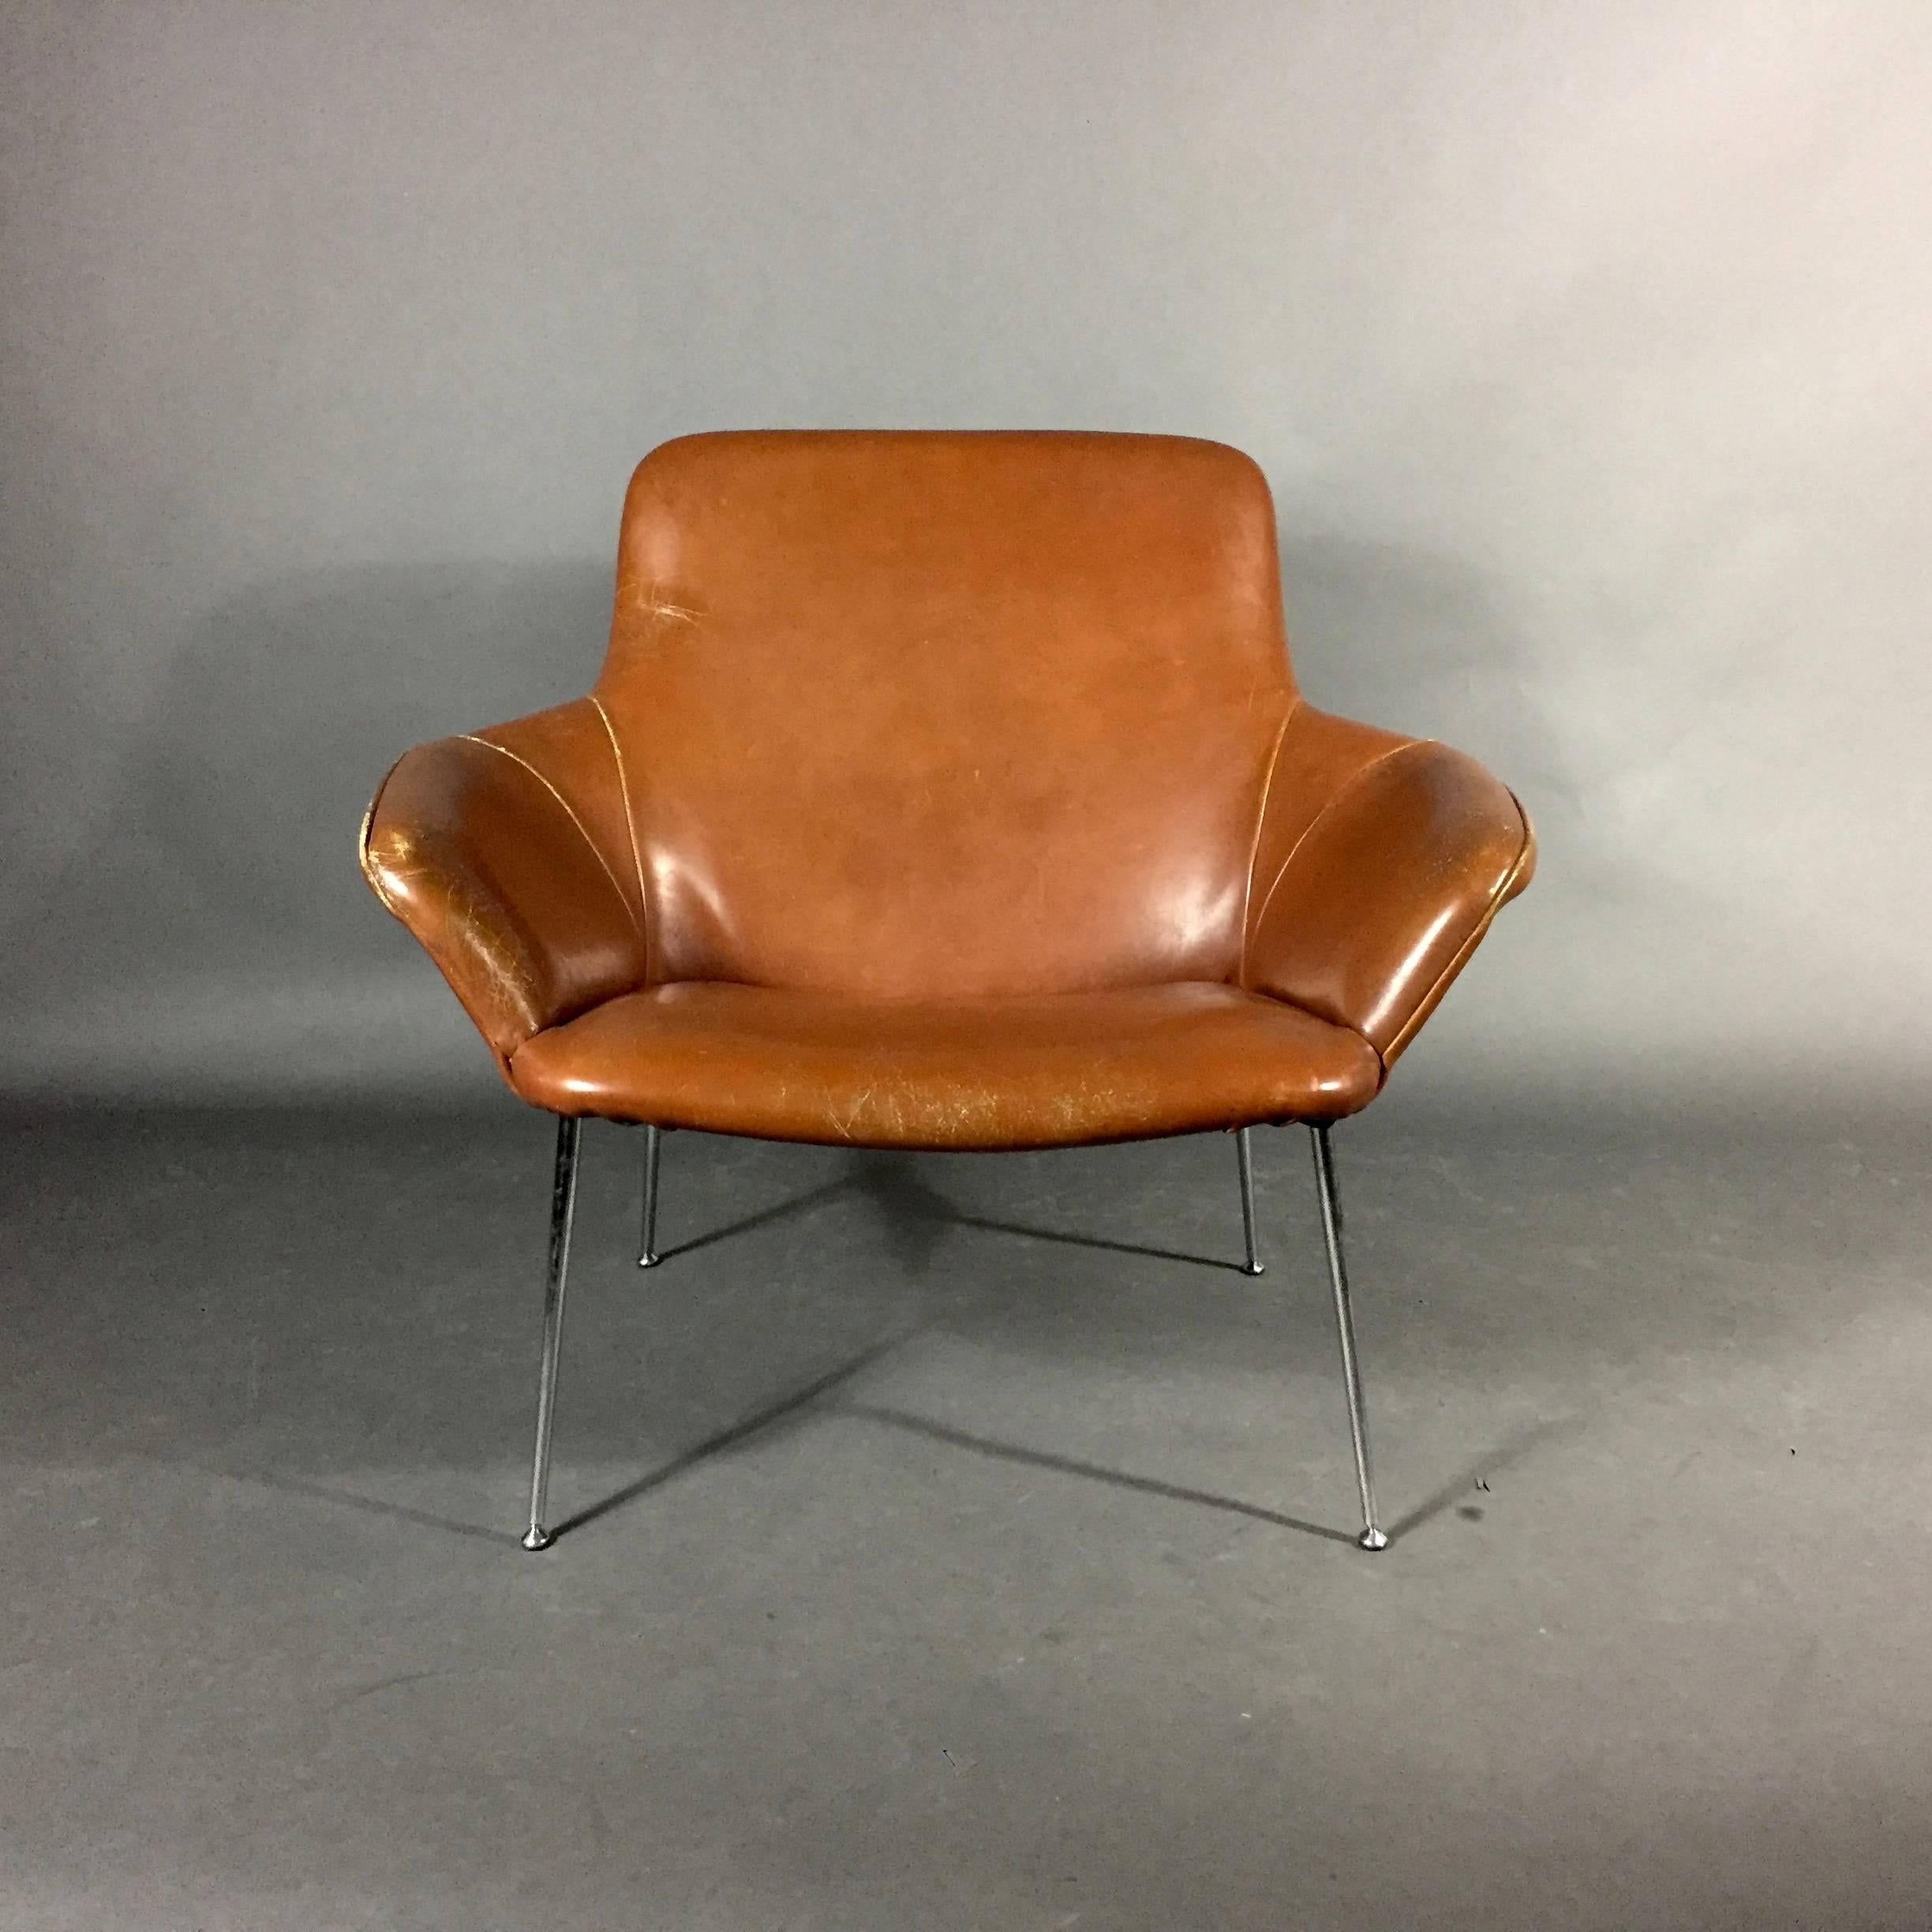 Mid-20th Century Poul Nørreklit Leather and Steel Club Chair, Denmark 1960s